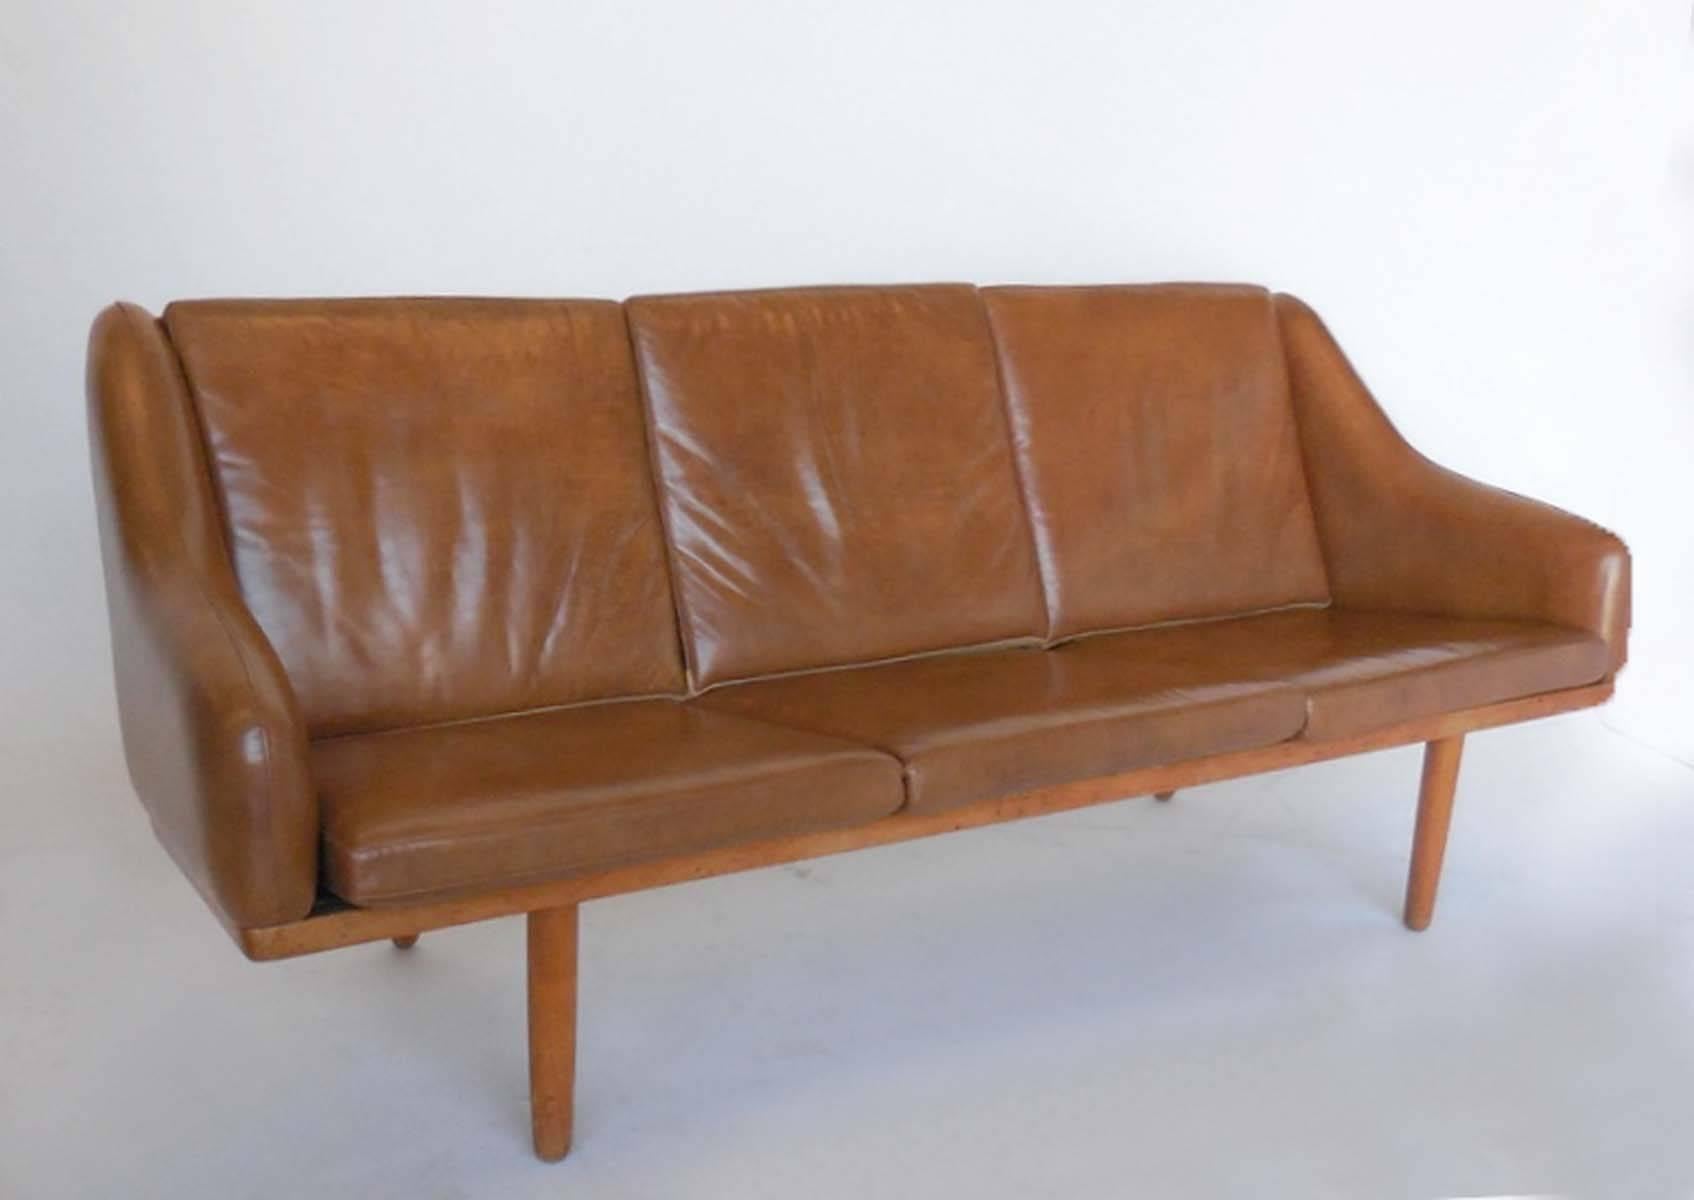 1955 oak framed leather sofa by Poul Volther, Denmark in very good condition. Very light wear considering its age. Cognac color leather.